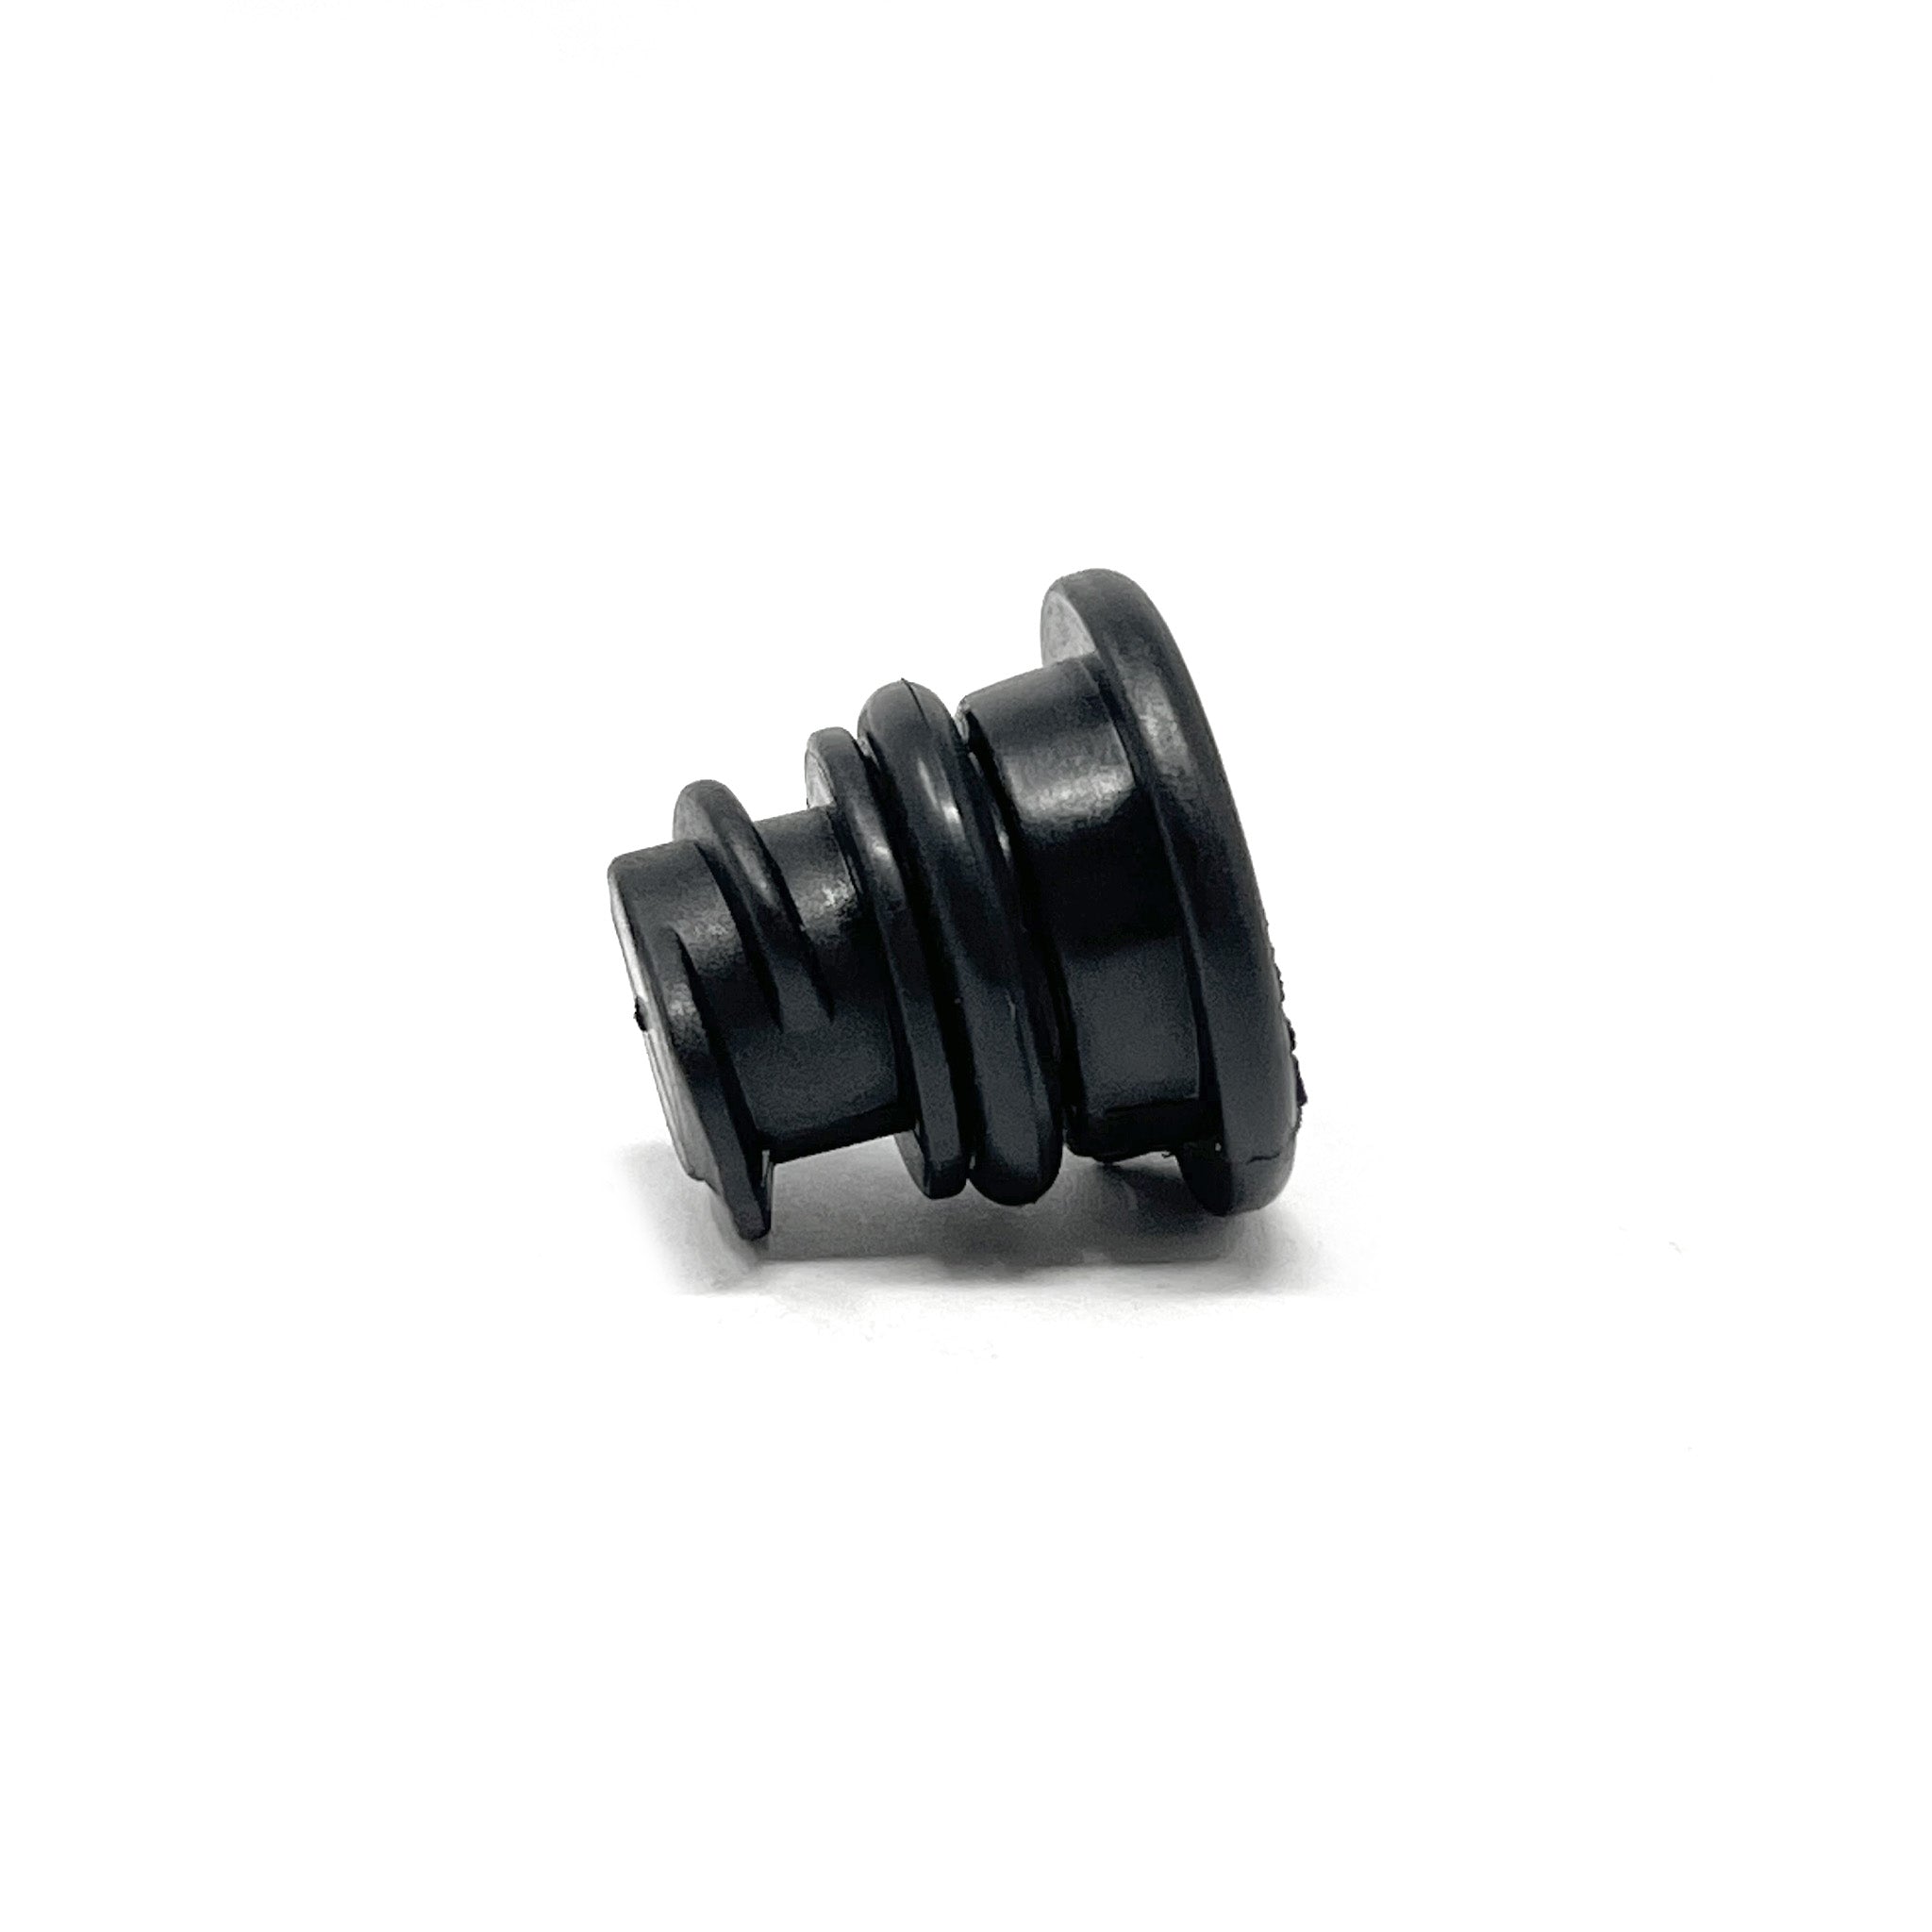 Plastic Black Specialty Drain Plug for VW and Audi